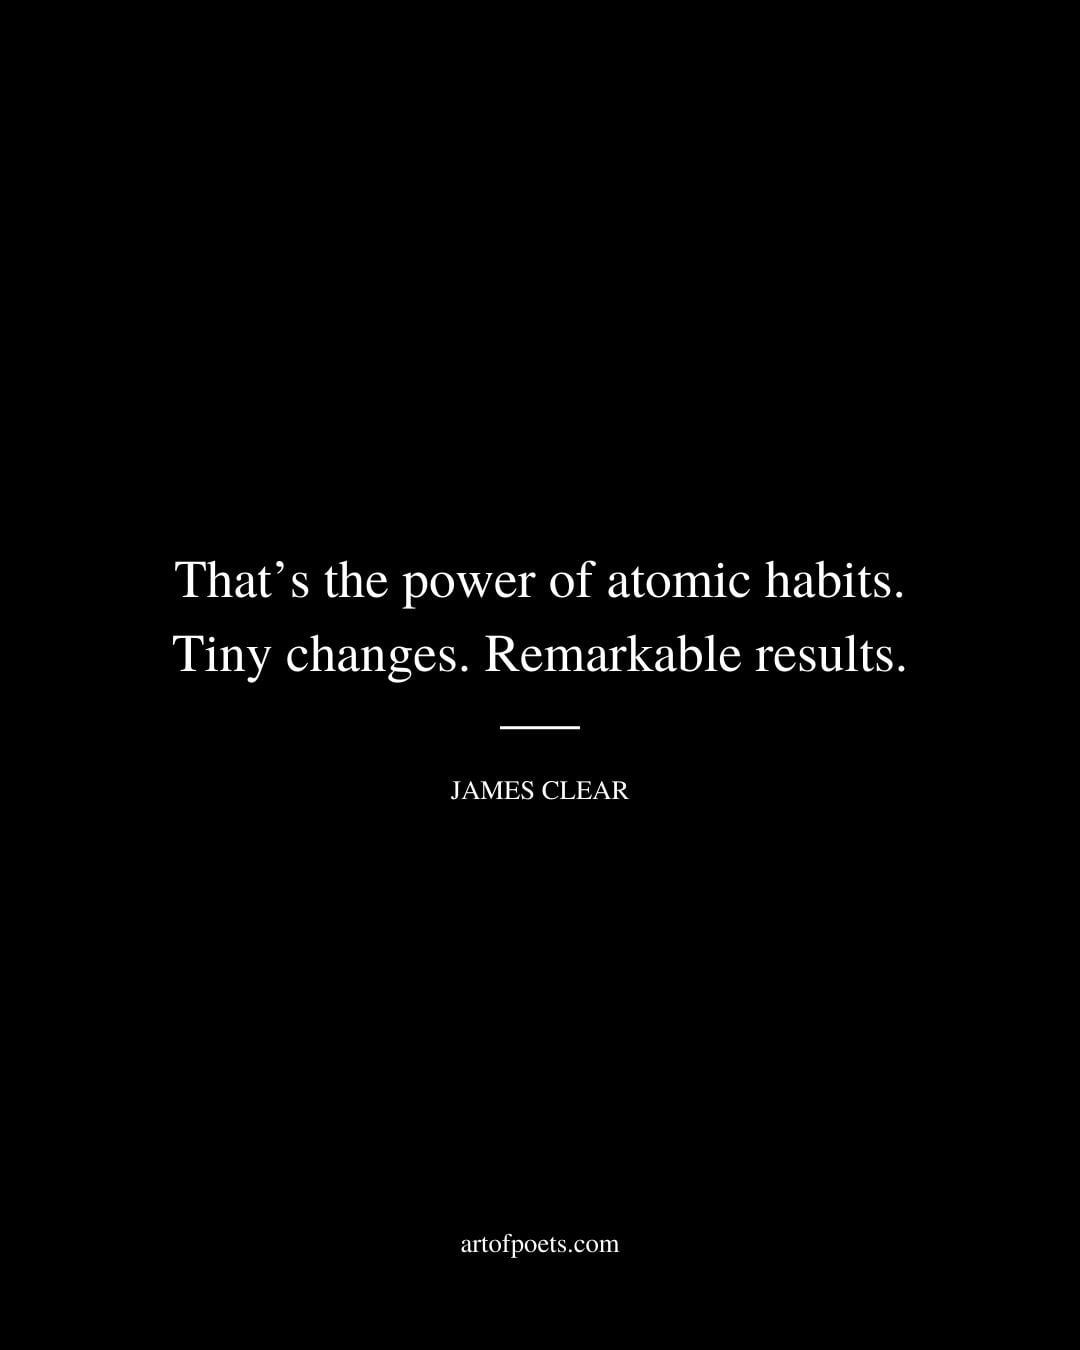 Thats the power of atomic habits. Tiny changes. Remarkable results.